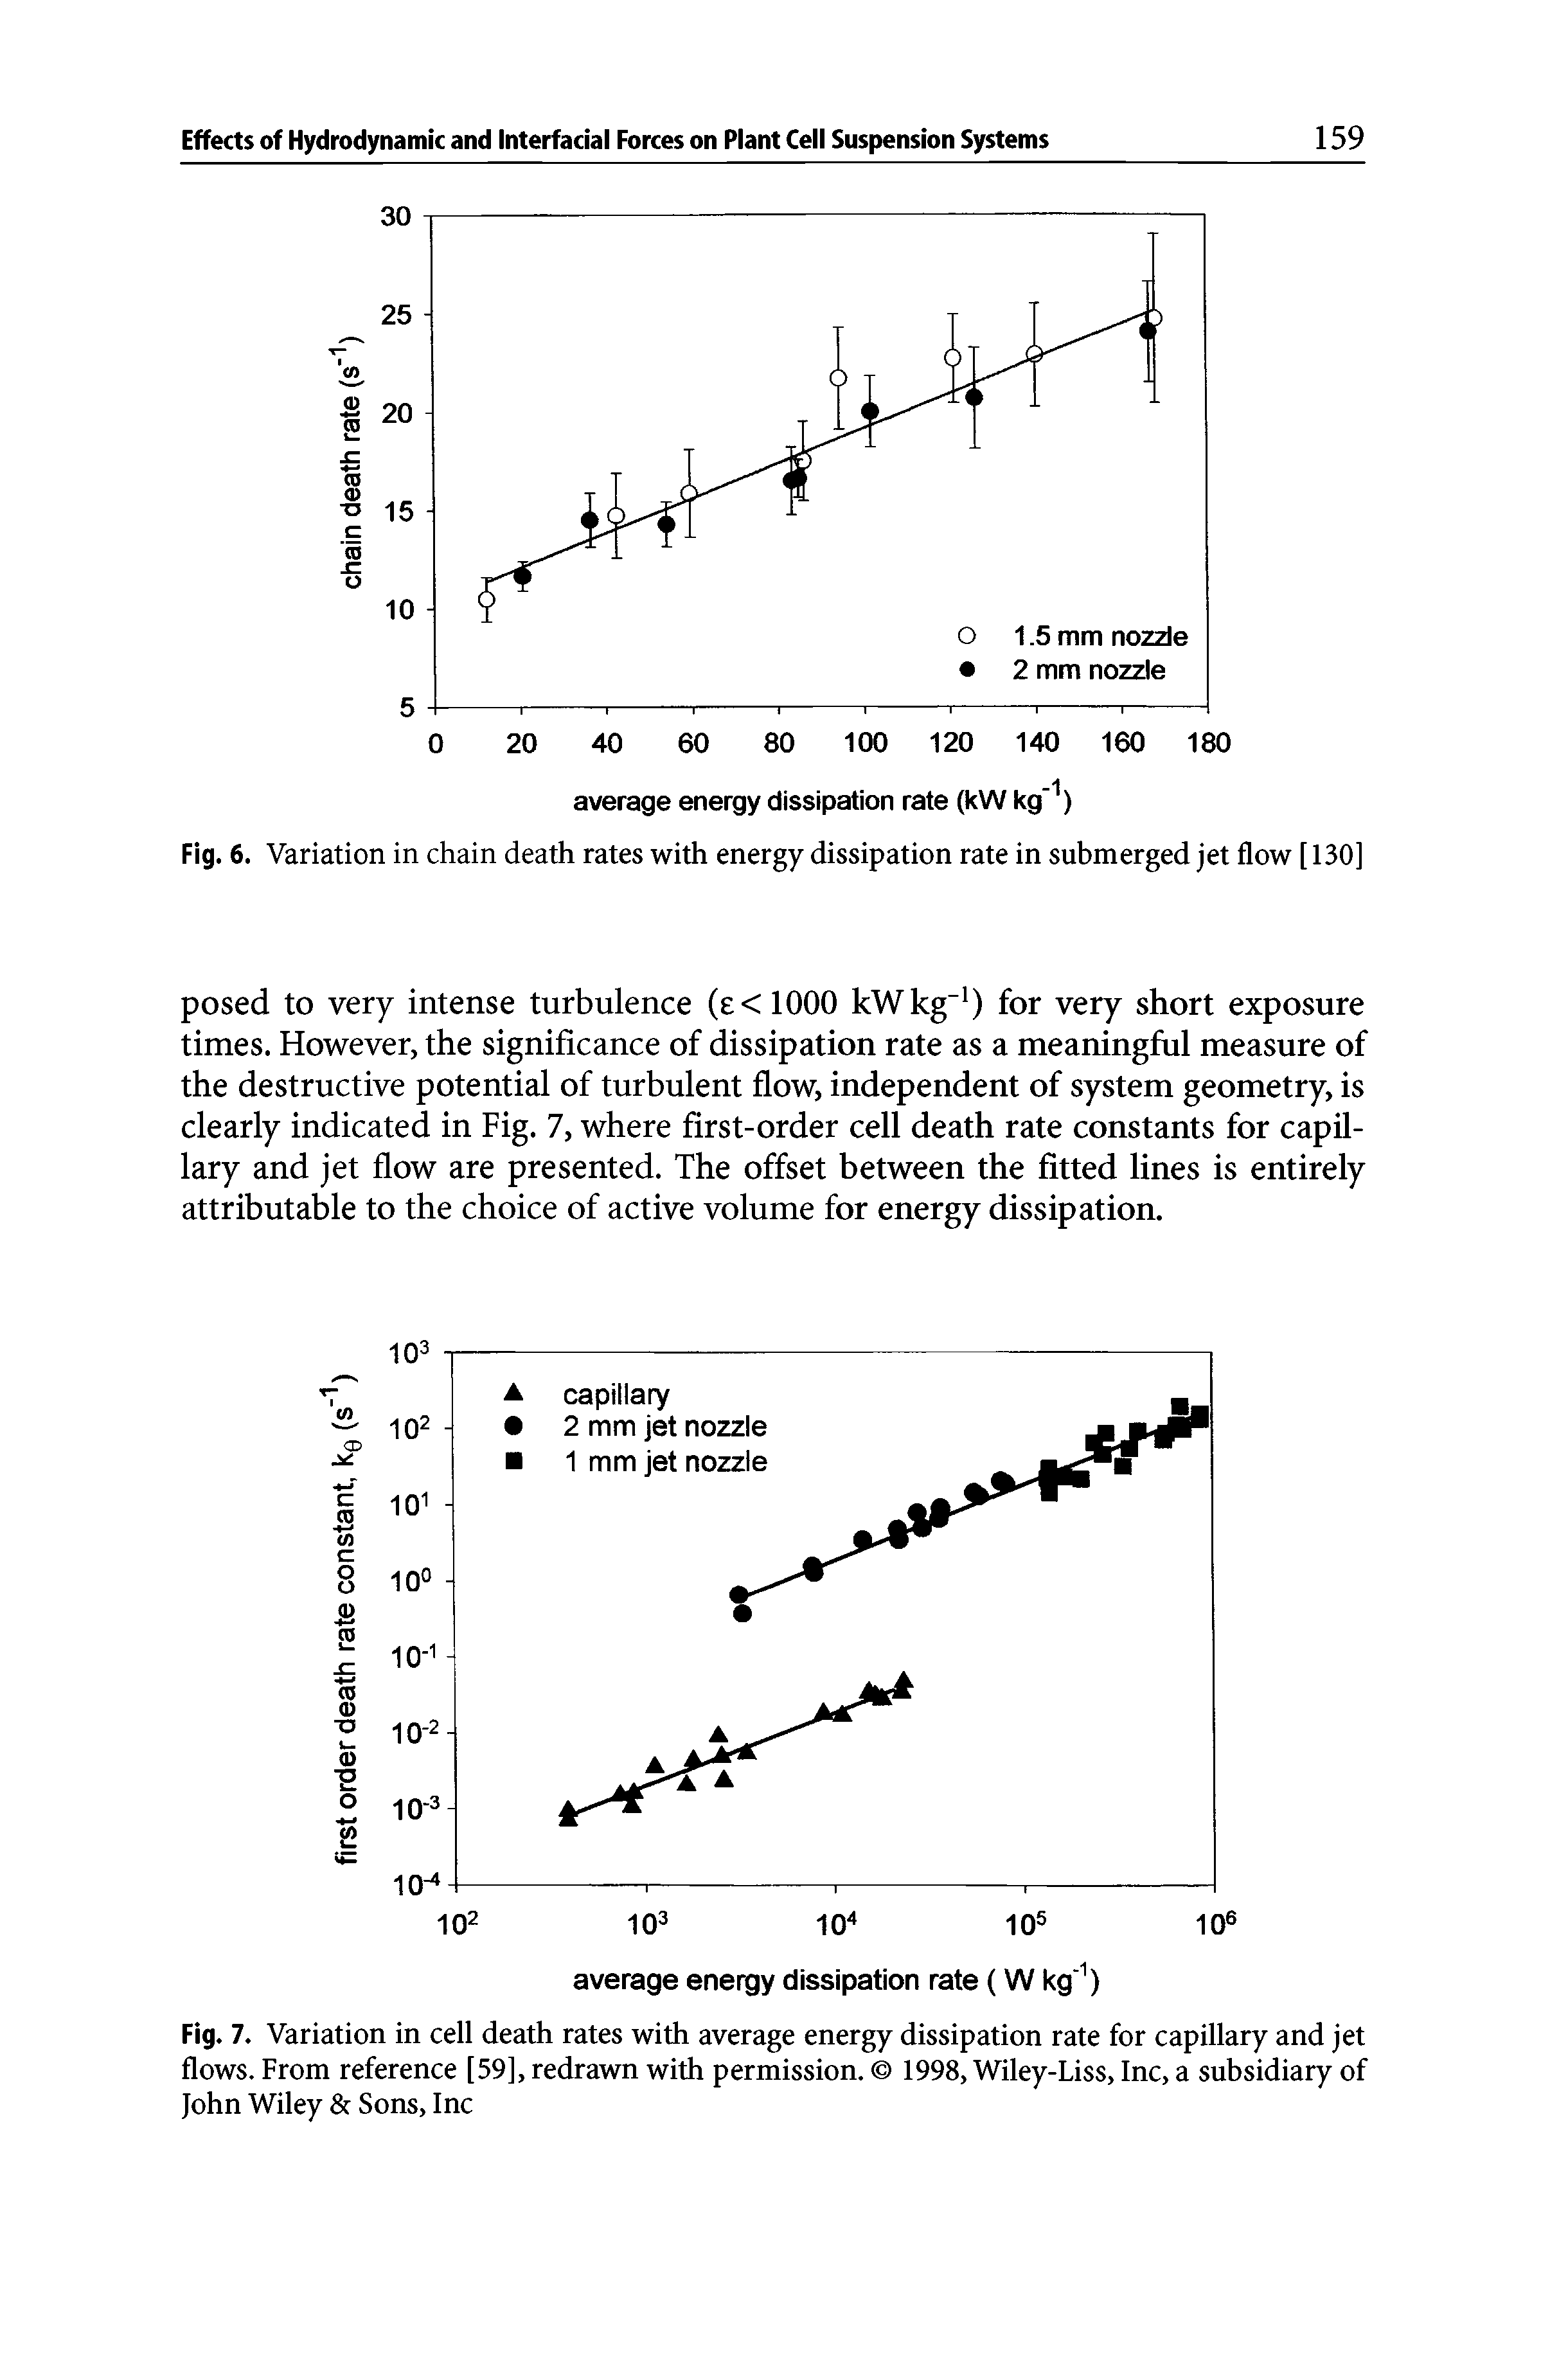 Fig. 7. Variation in cell death rates with average energy dissipation rate for capillary and jet flows. From reference [59], redrawn with permission. 1998, Wiley-Liss, Inc, a subsidiary of John Wiley Sons, Inc...